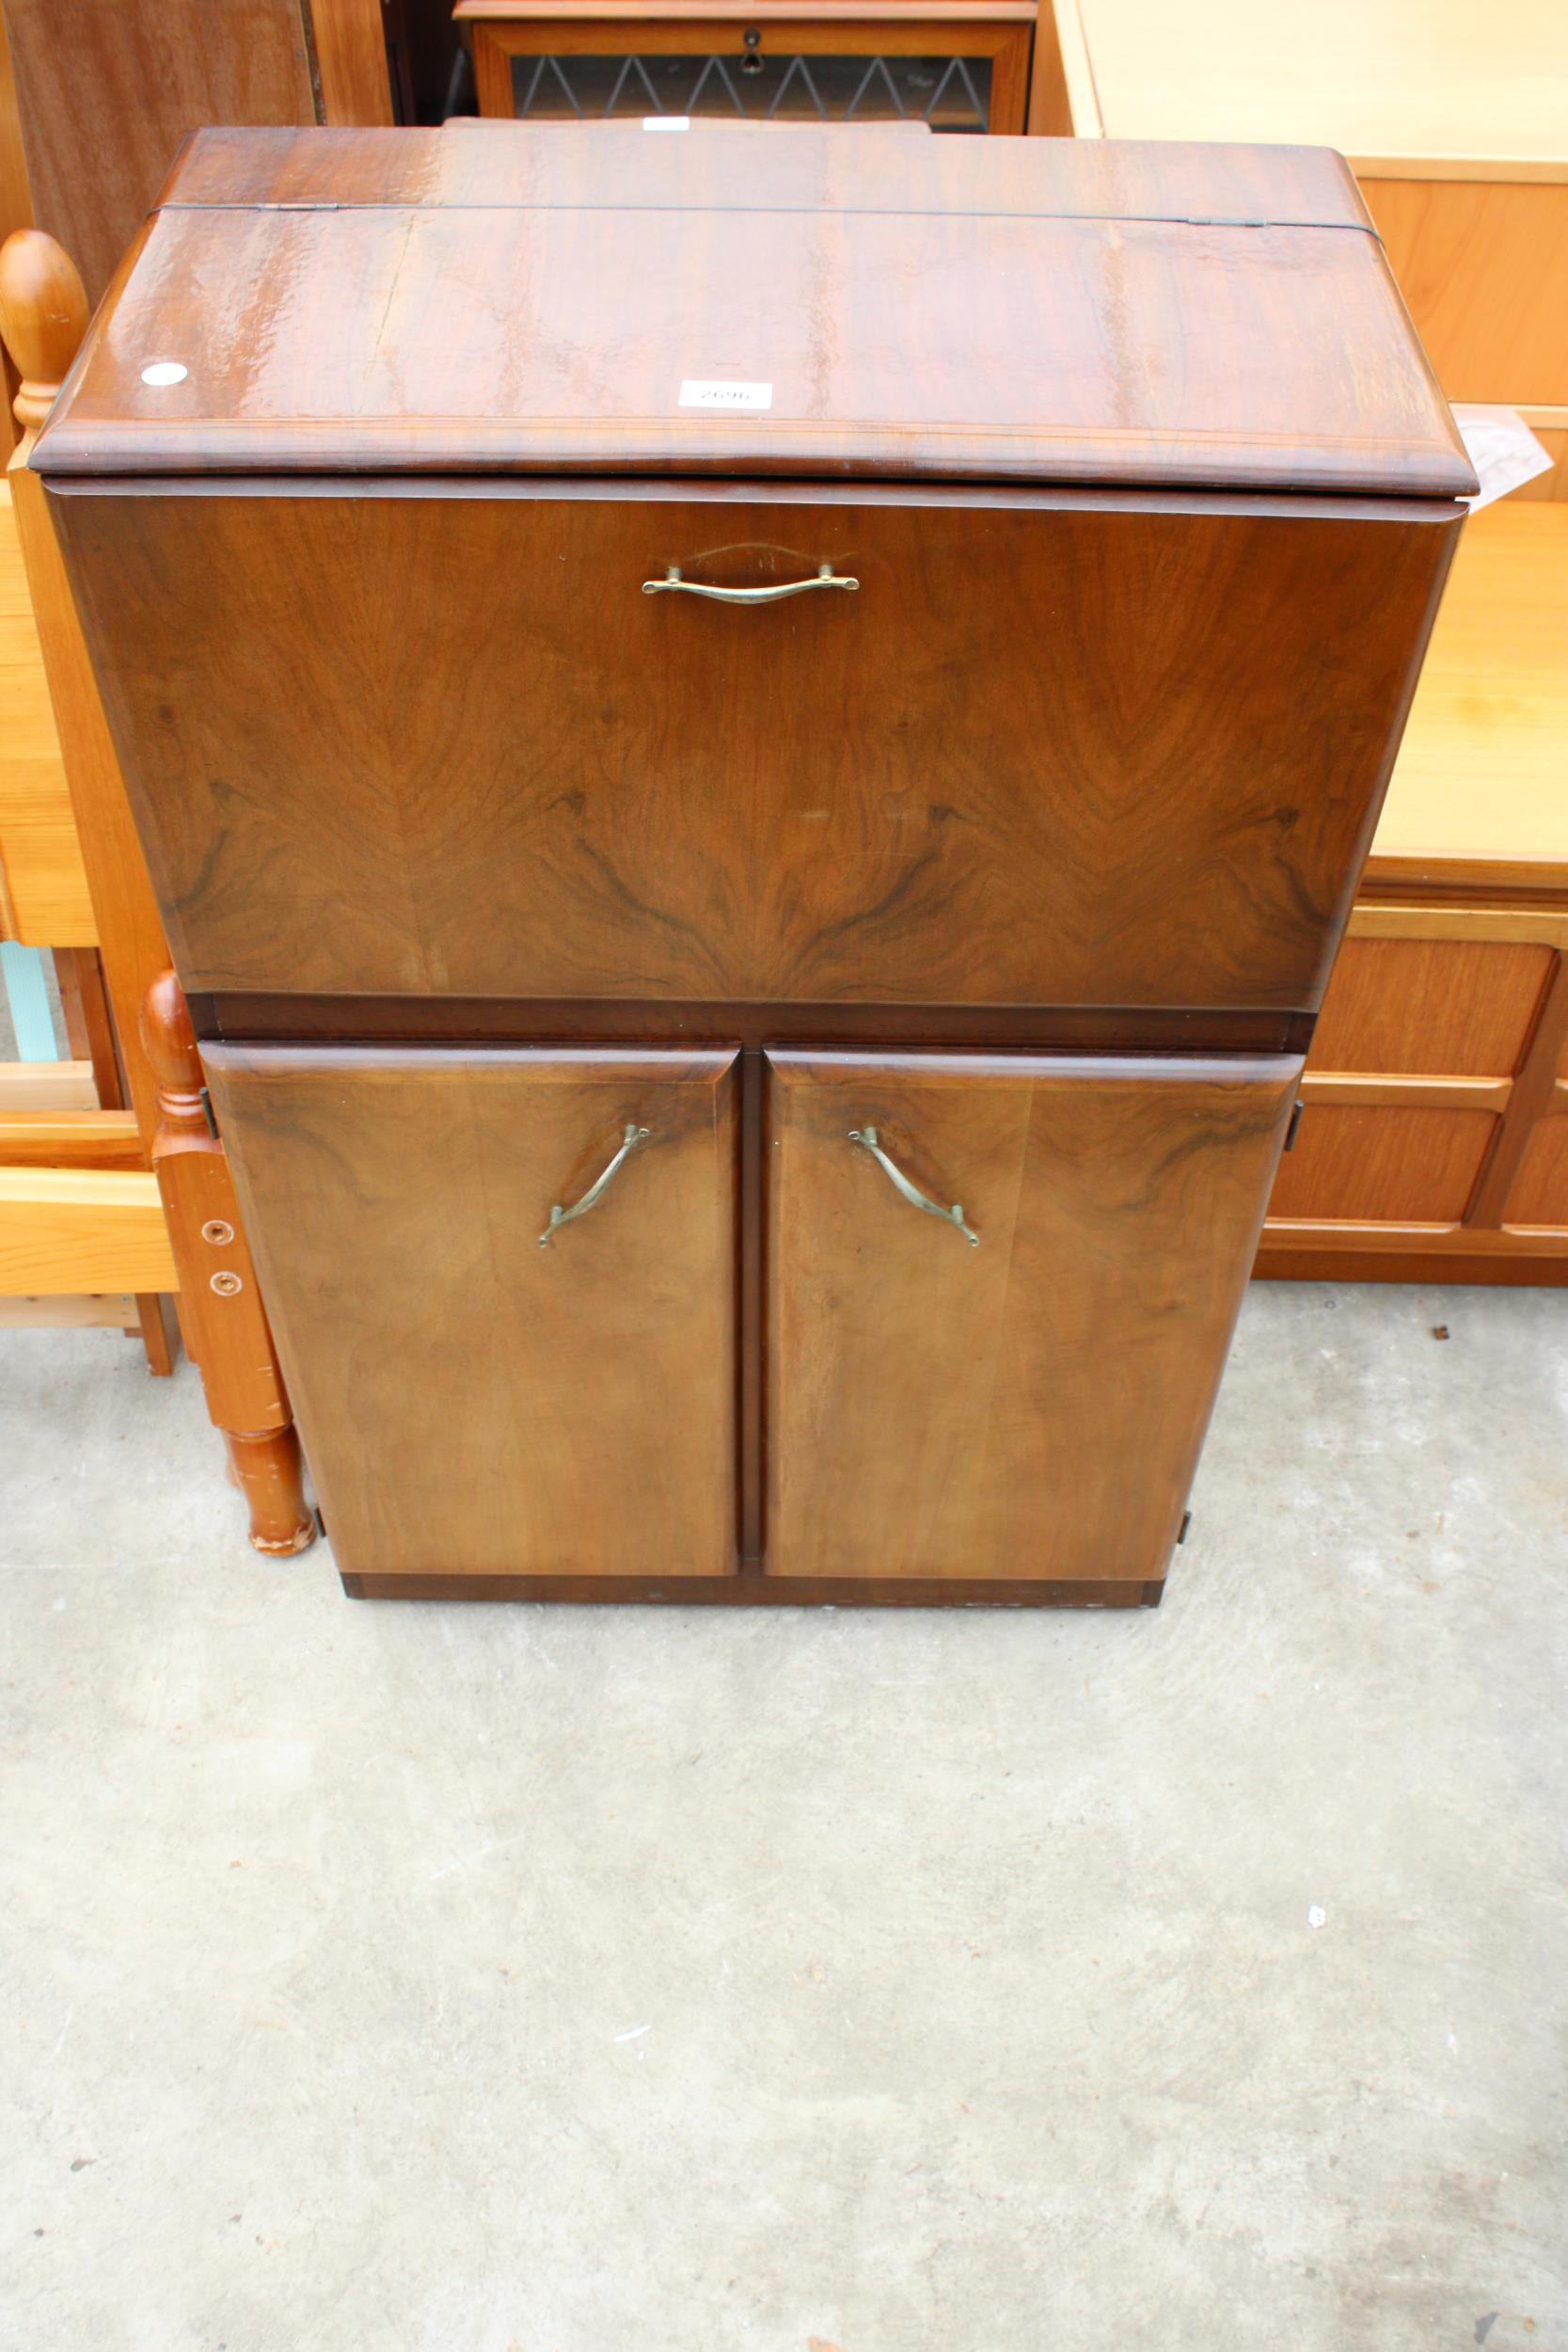 A MID 20TH CENTURY WALNUT COCKTAIL CABINET 24" WIDE